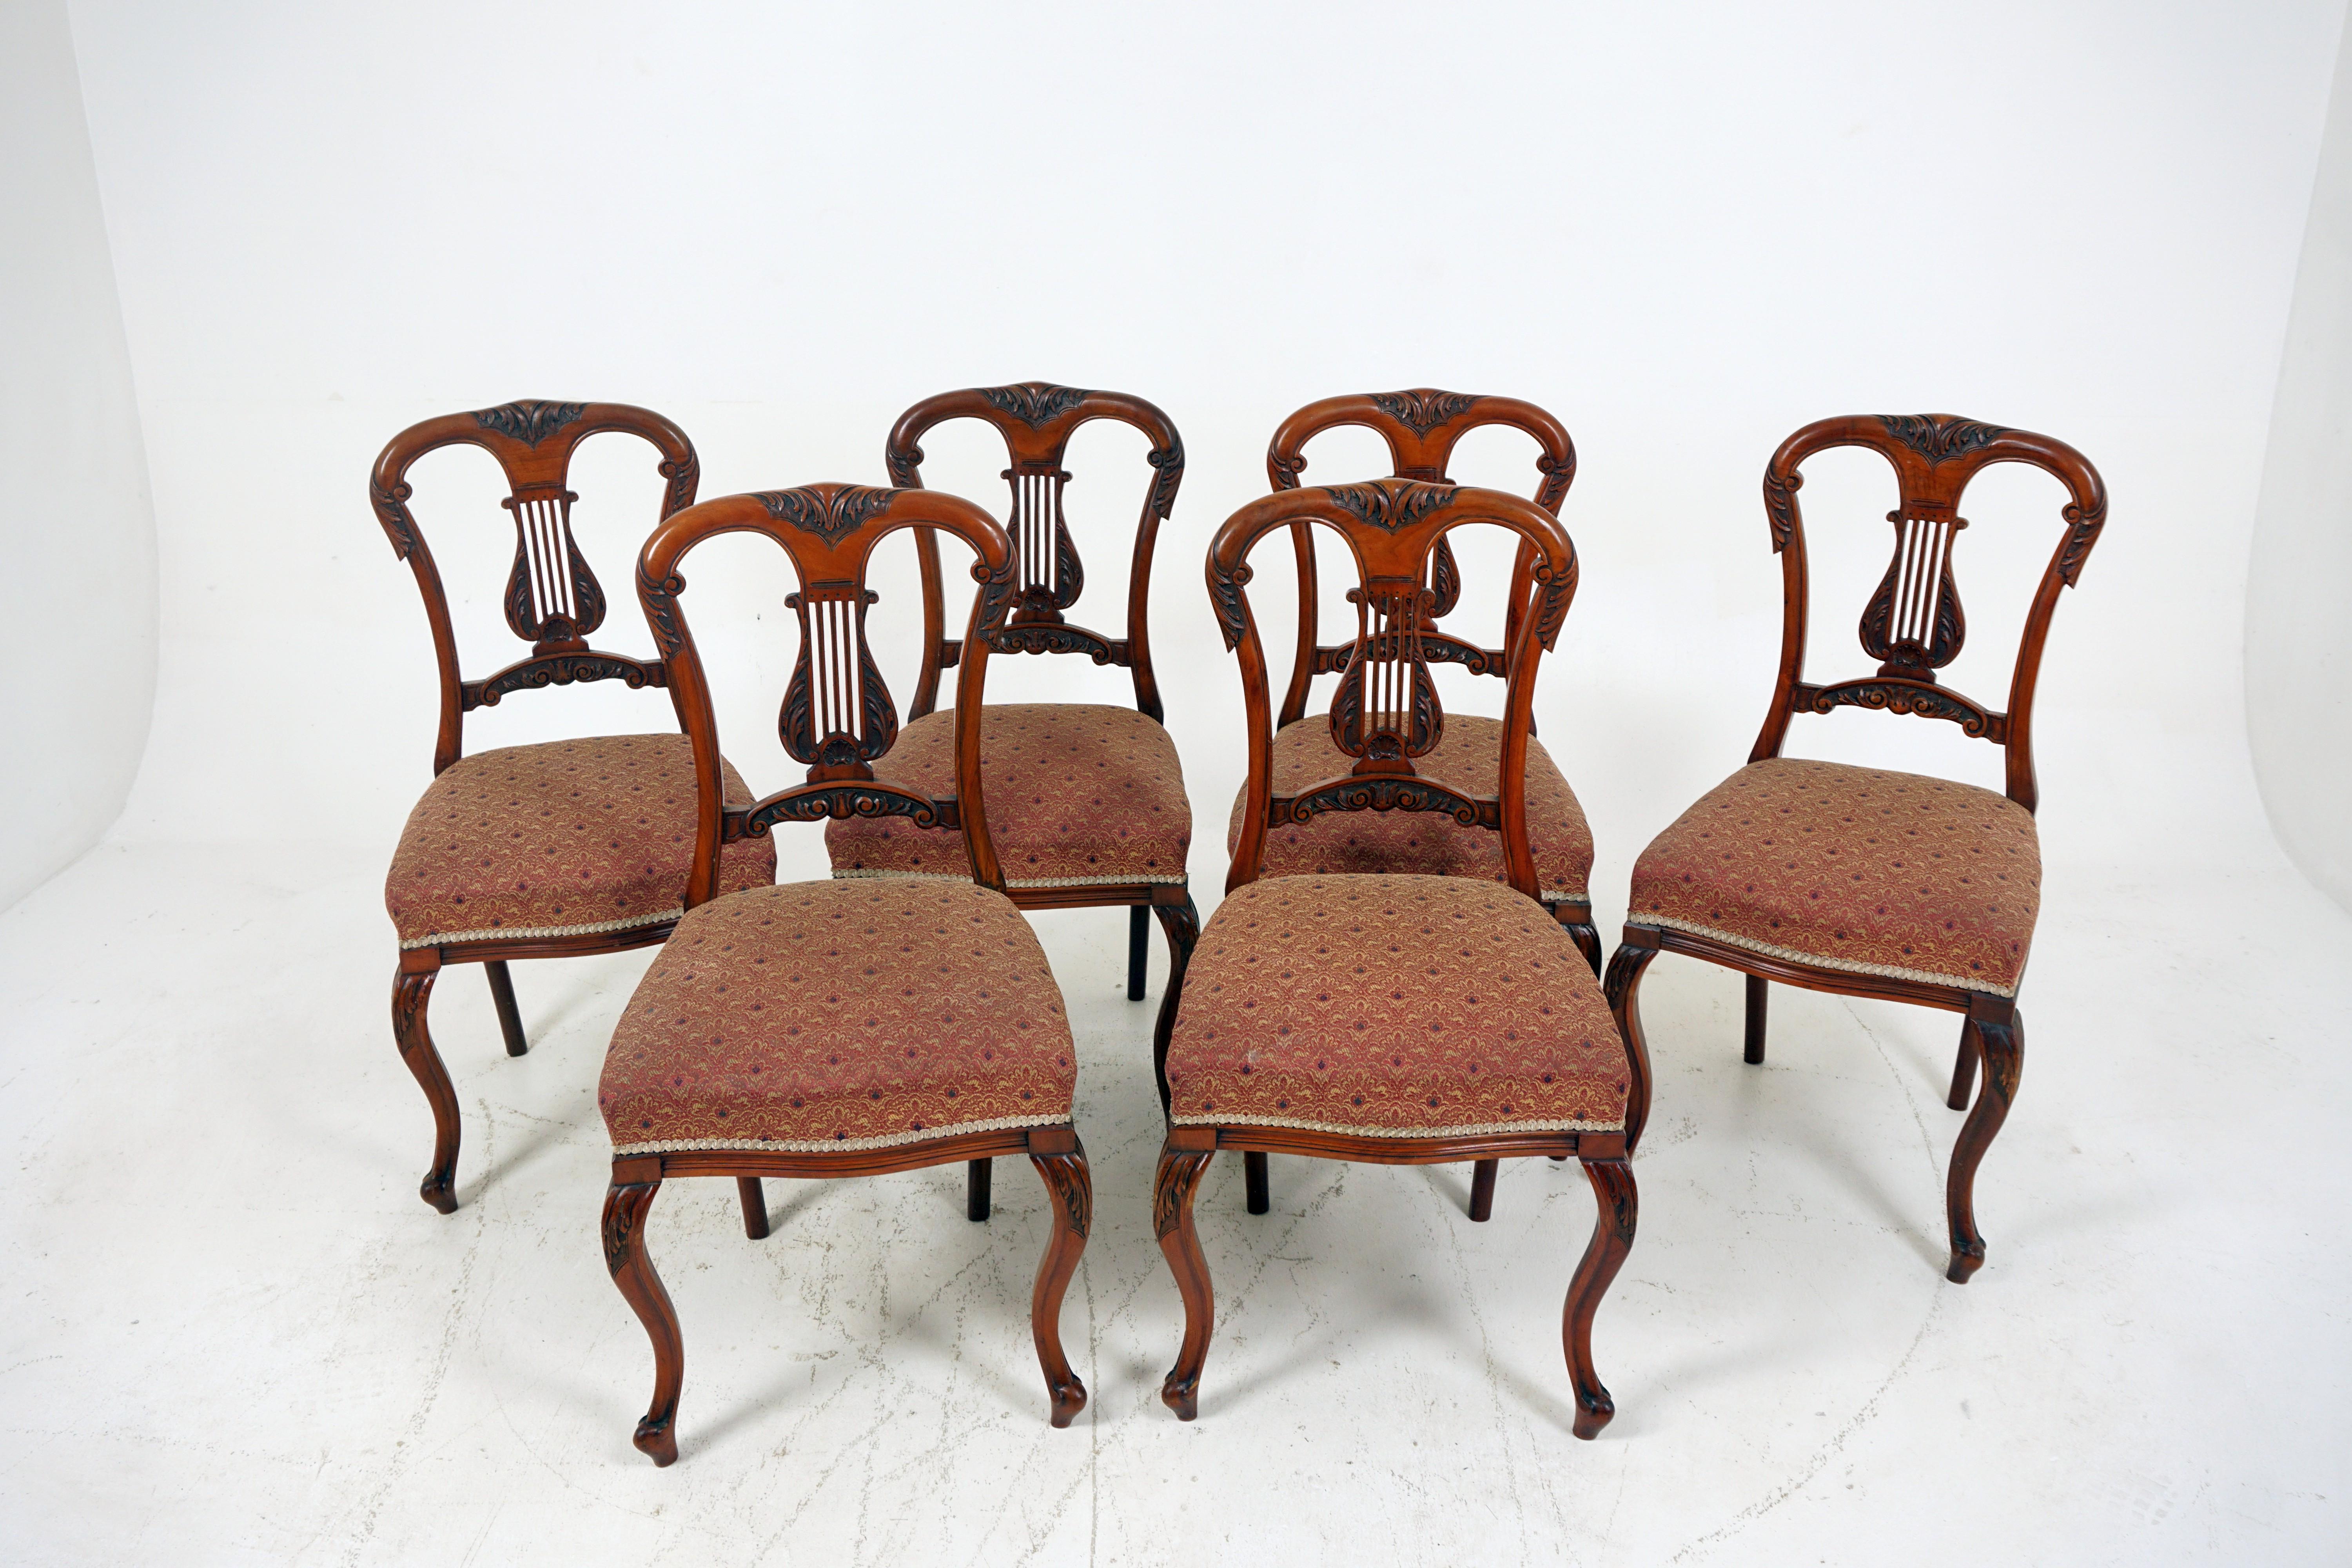 Set of 6 Antique Victorian Carved Walnut Dining Chairs, Scotland 1890, H223

Scotland 1890
Solid Walnut 
Original finish 
Carved top rail
Harp shaped open back
Upholstered seat
All standing on carved cabriole legs to the front
Wonderful quality and